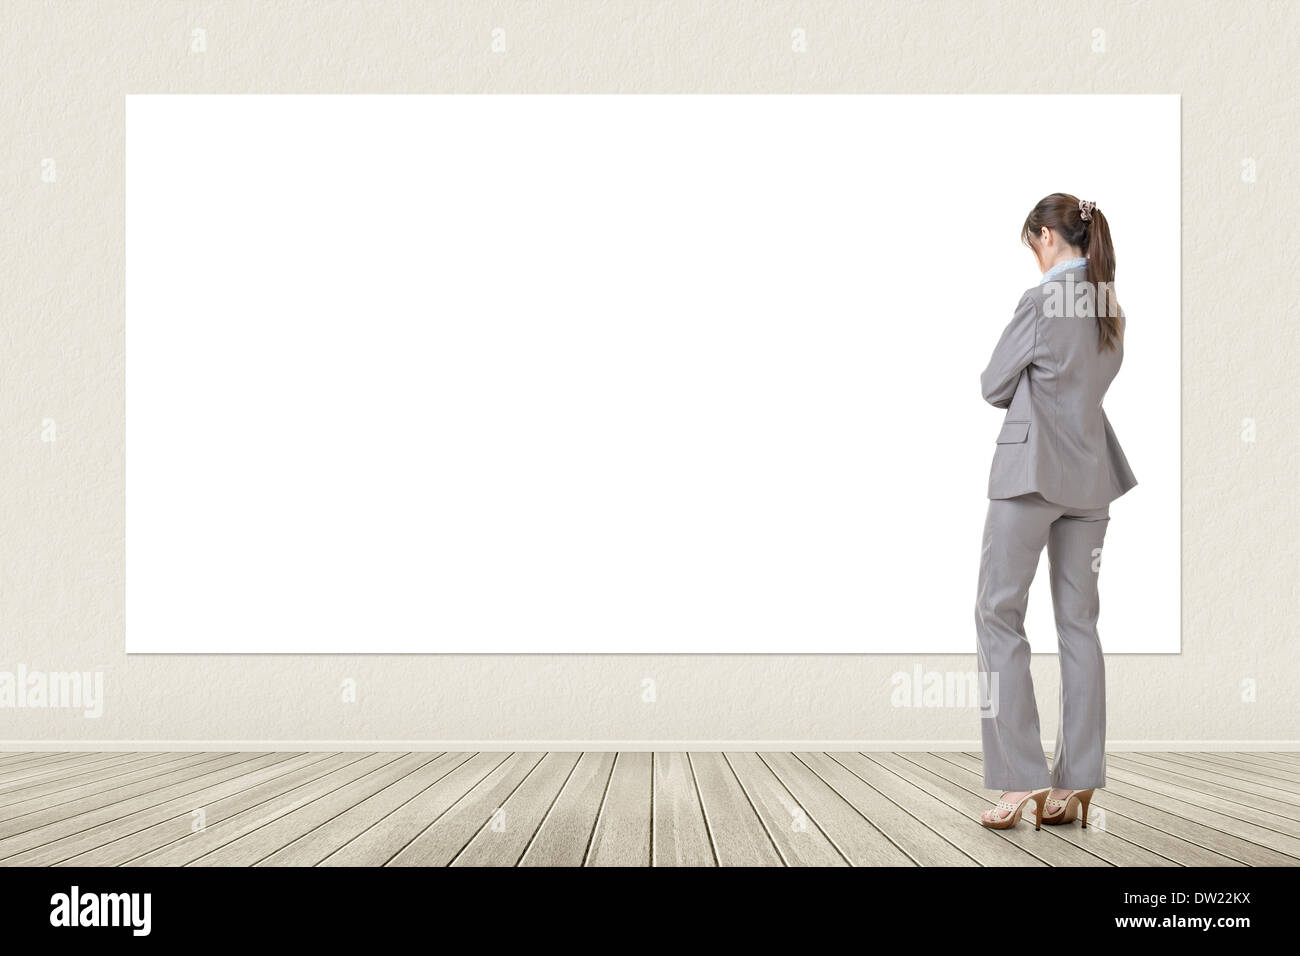 Asian business woman looking at blank banner Stock Photo